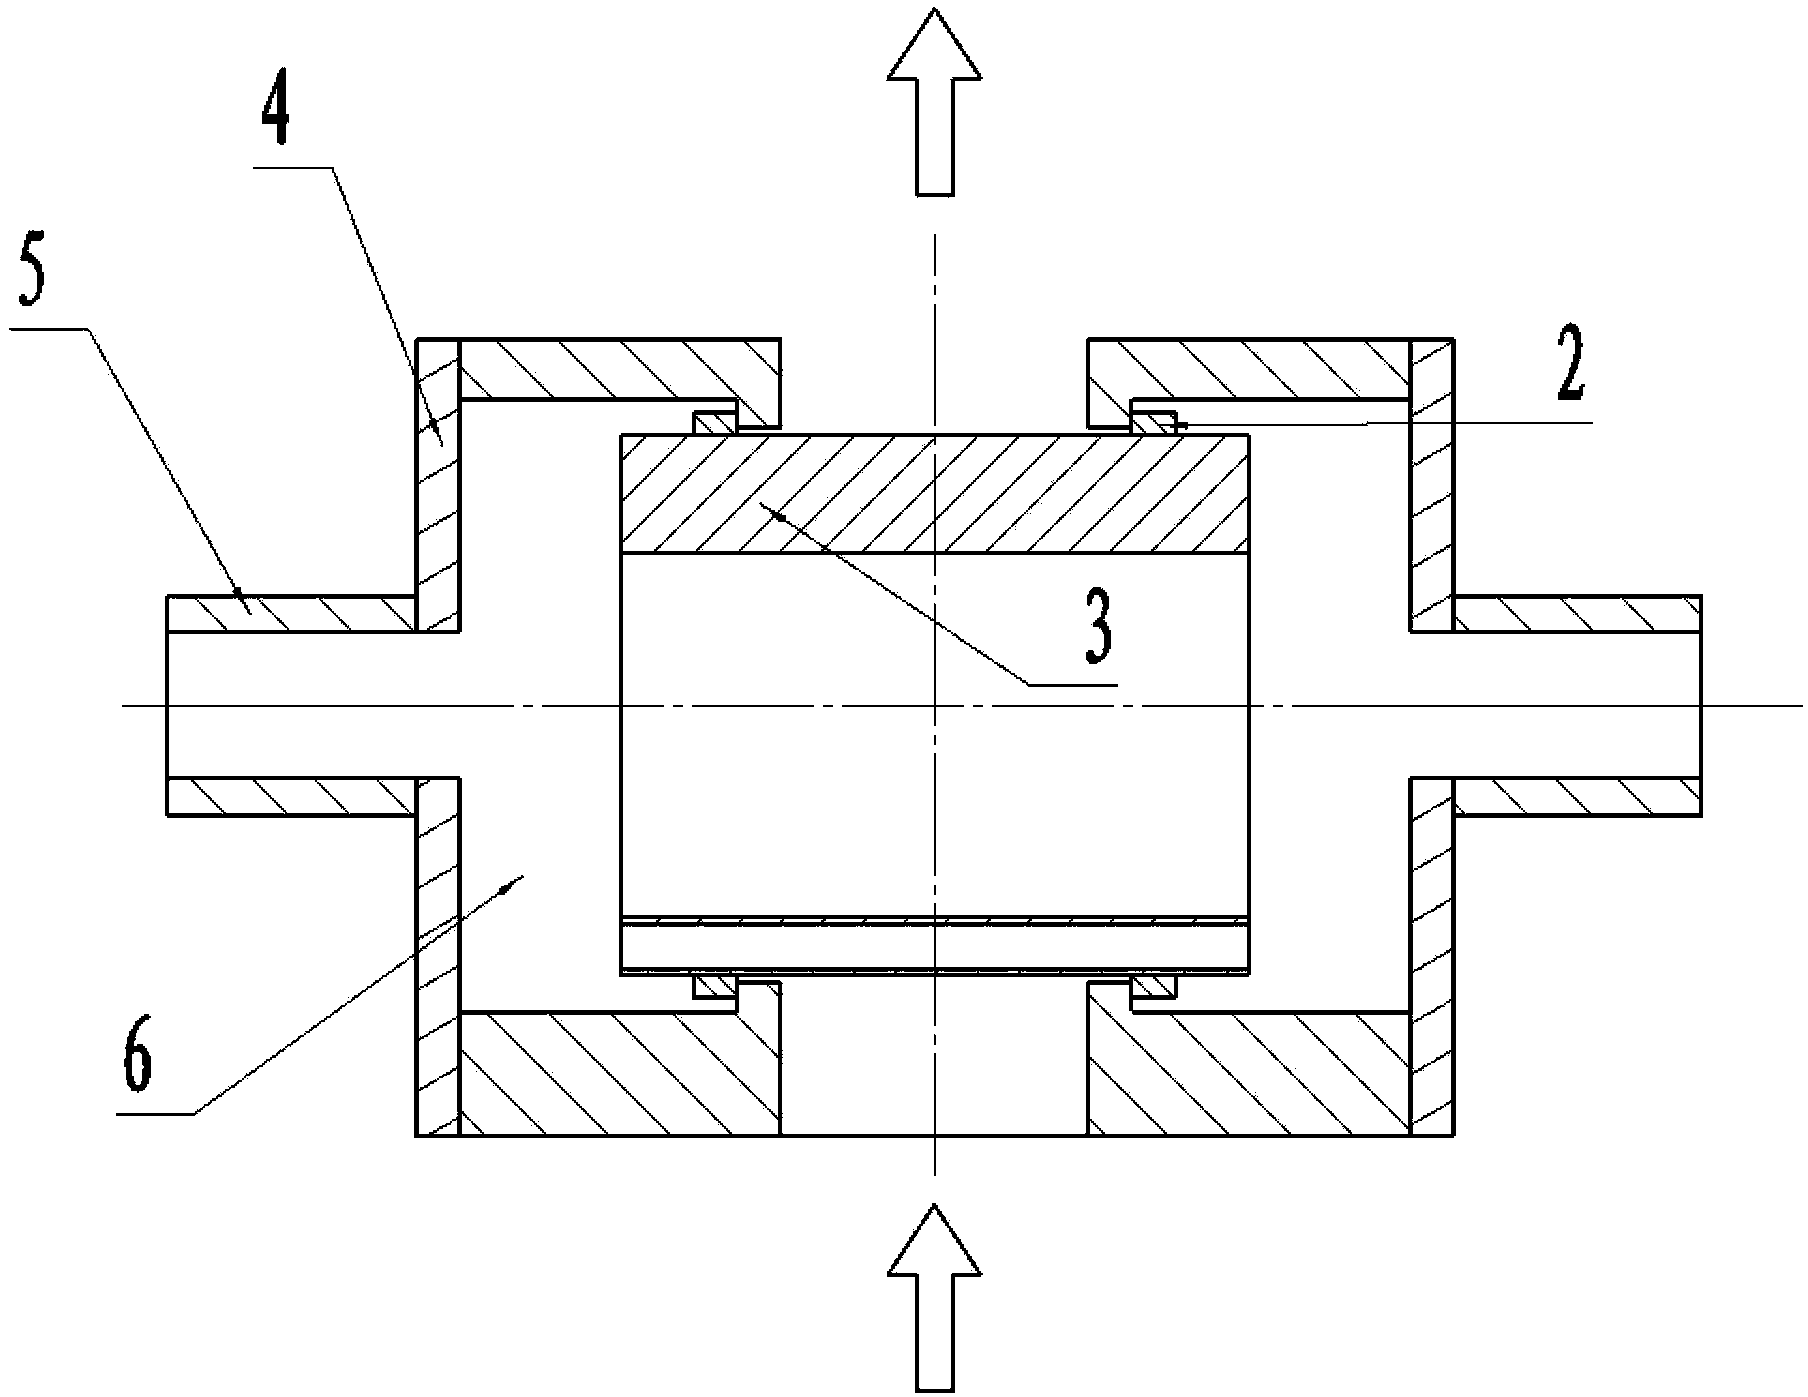 Nozzle module for transversal flow injection iodine mixing nozzle experiment research